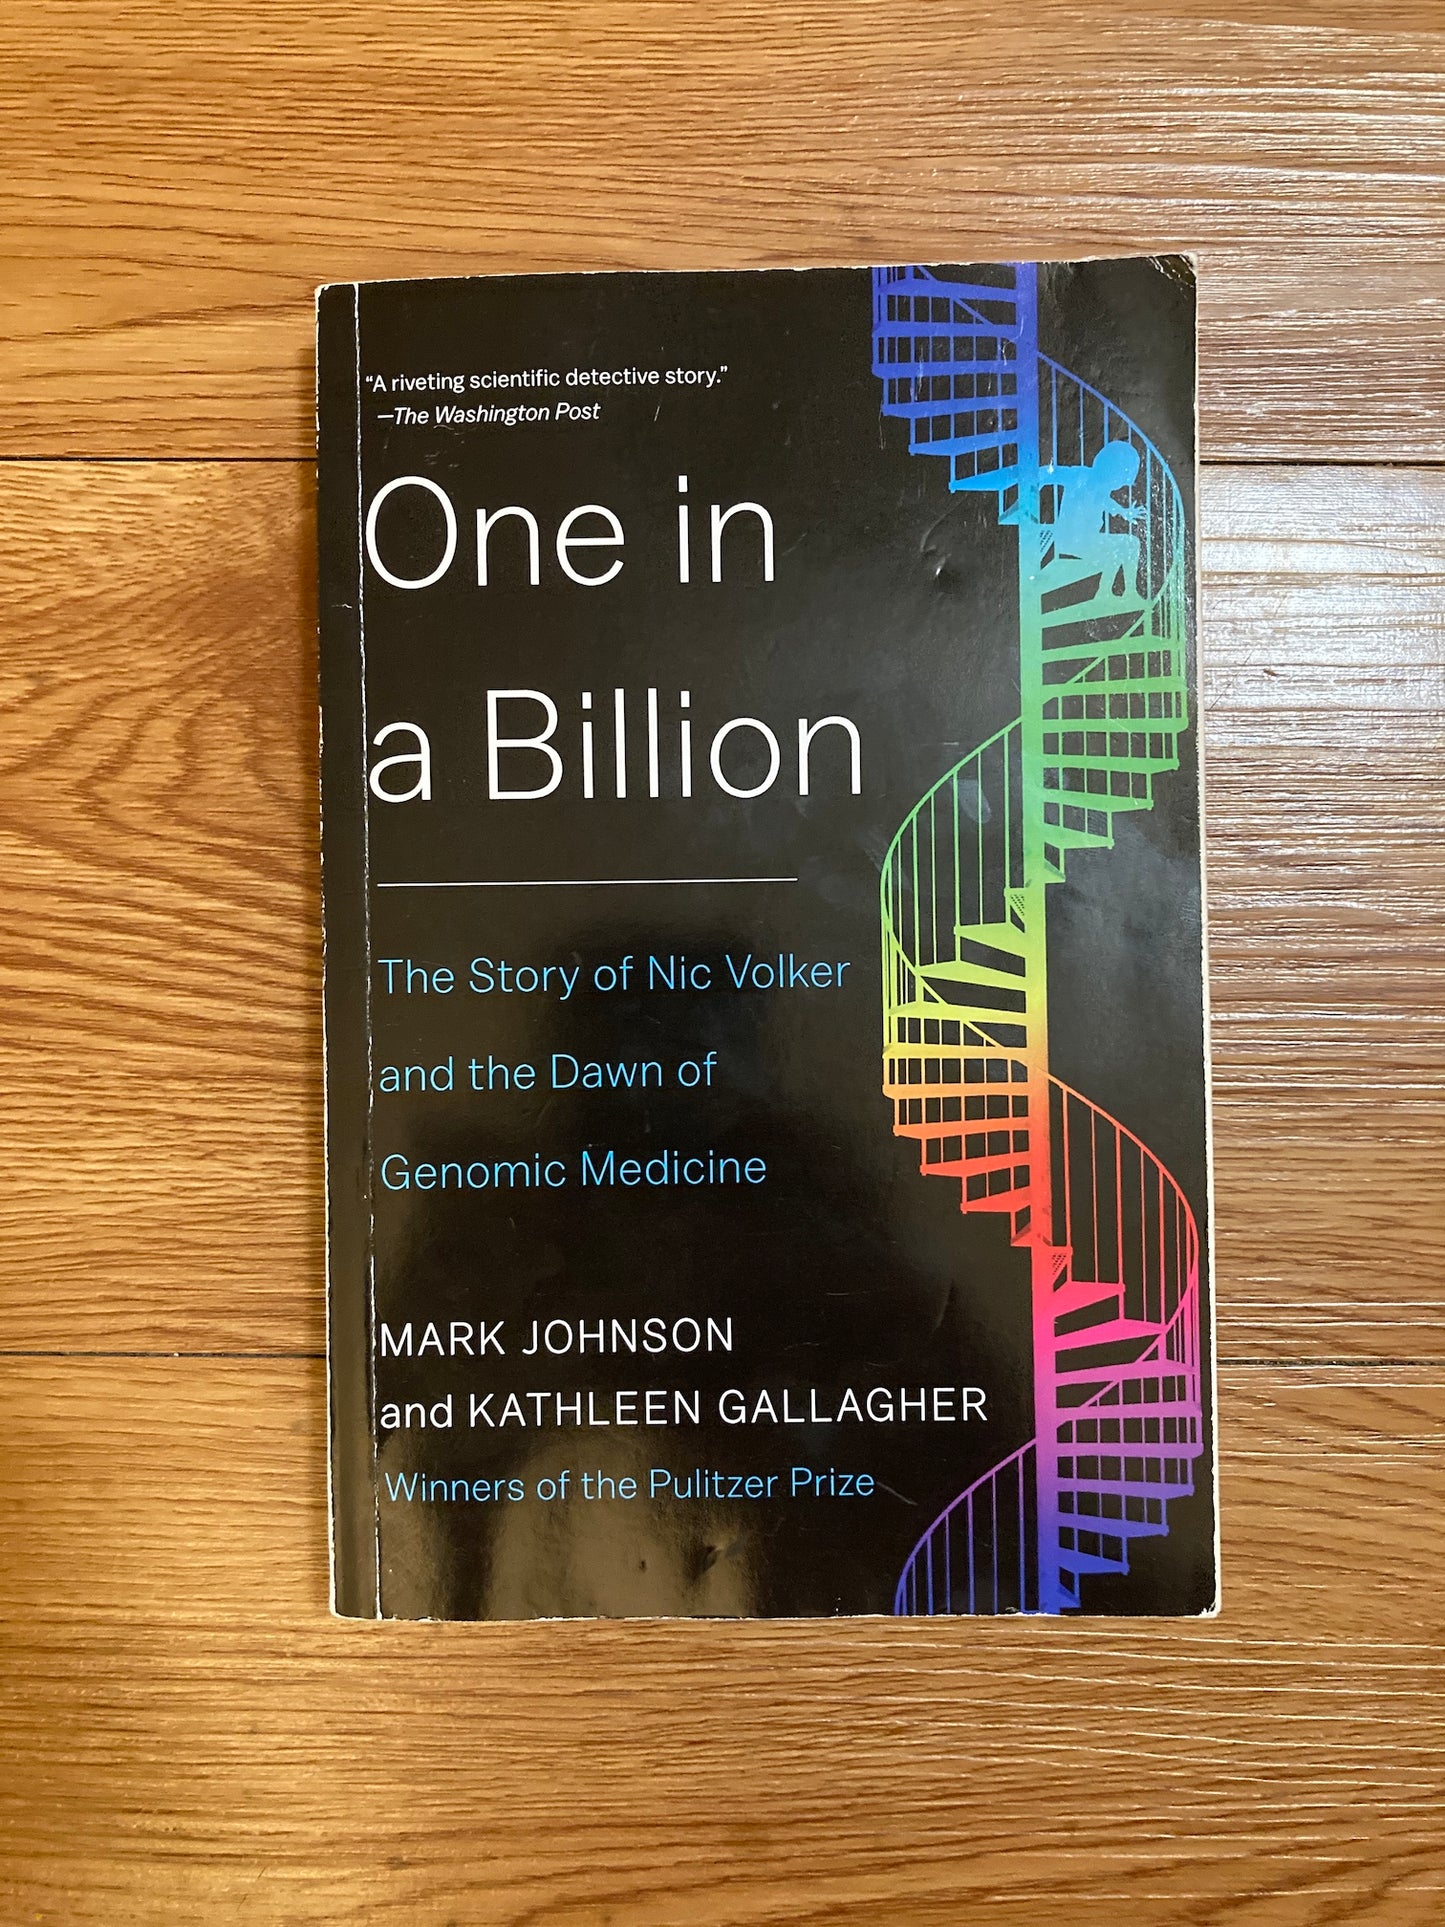 One in a Billion: The Story of Nic Volker and the Dawn of Genomic